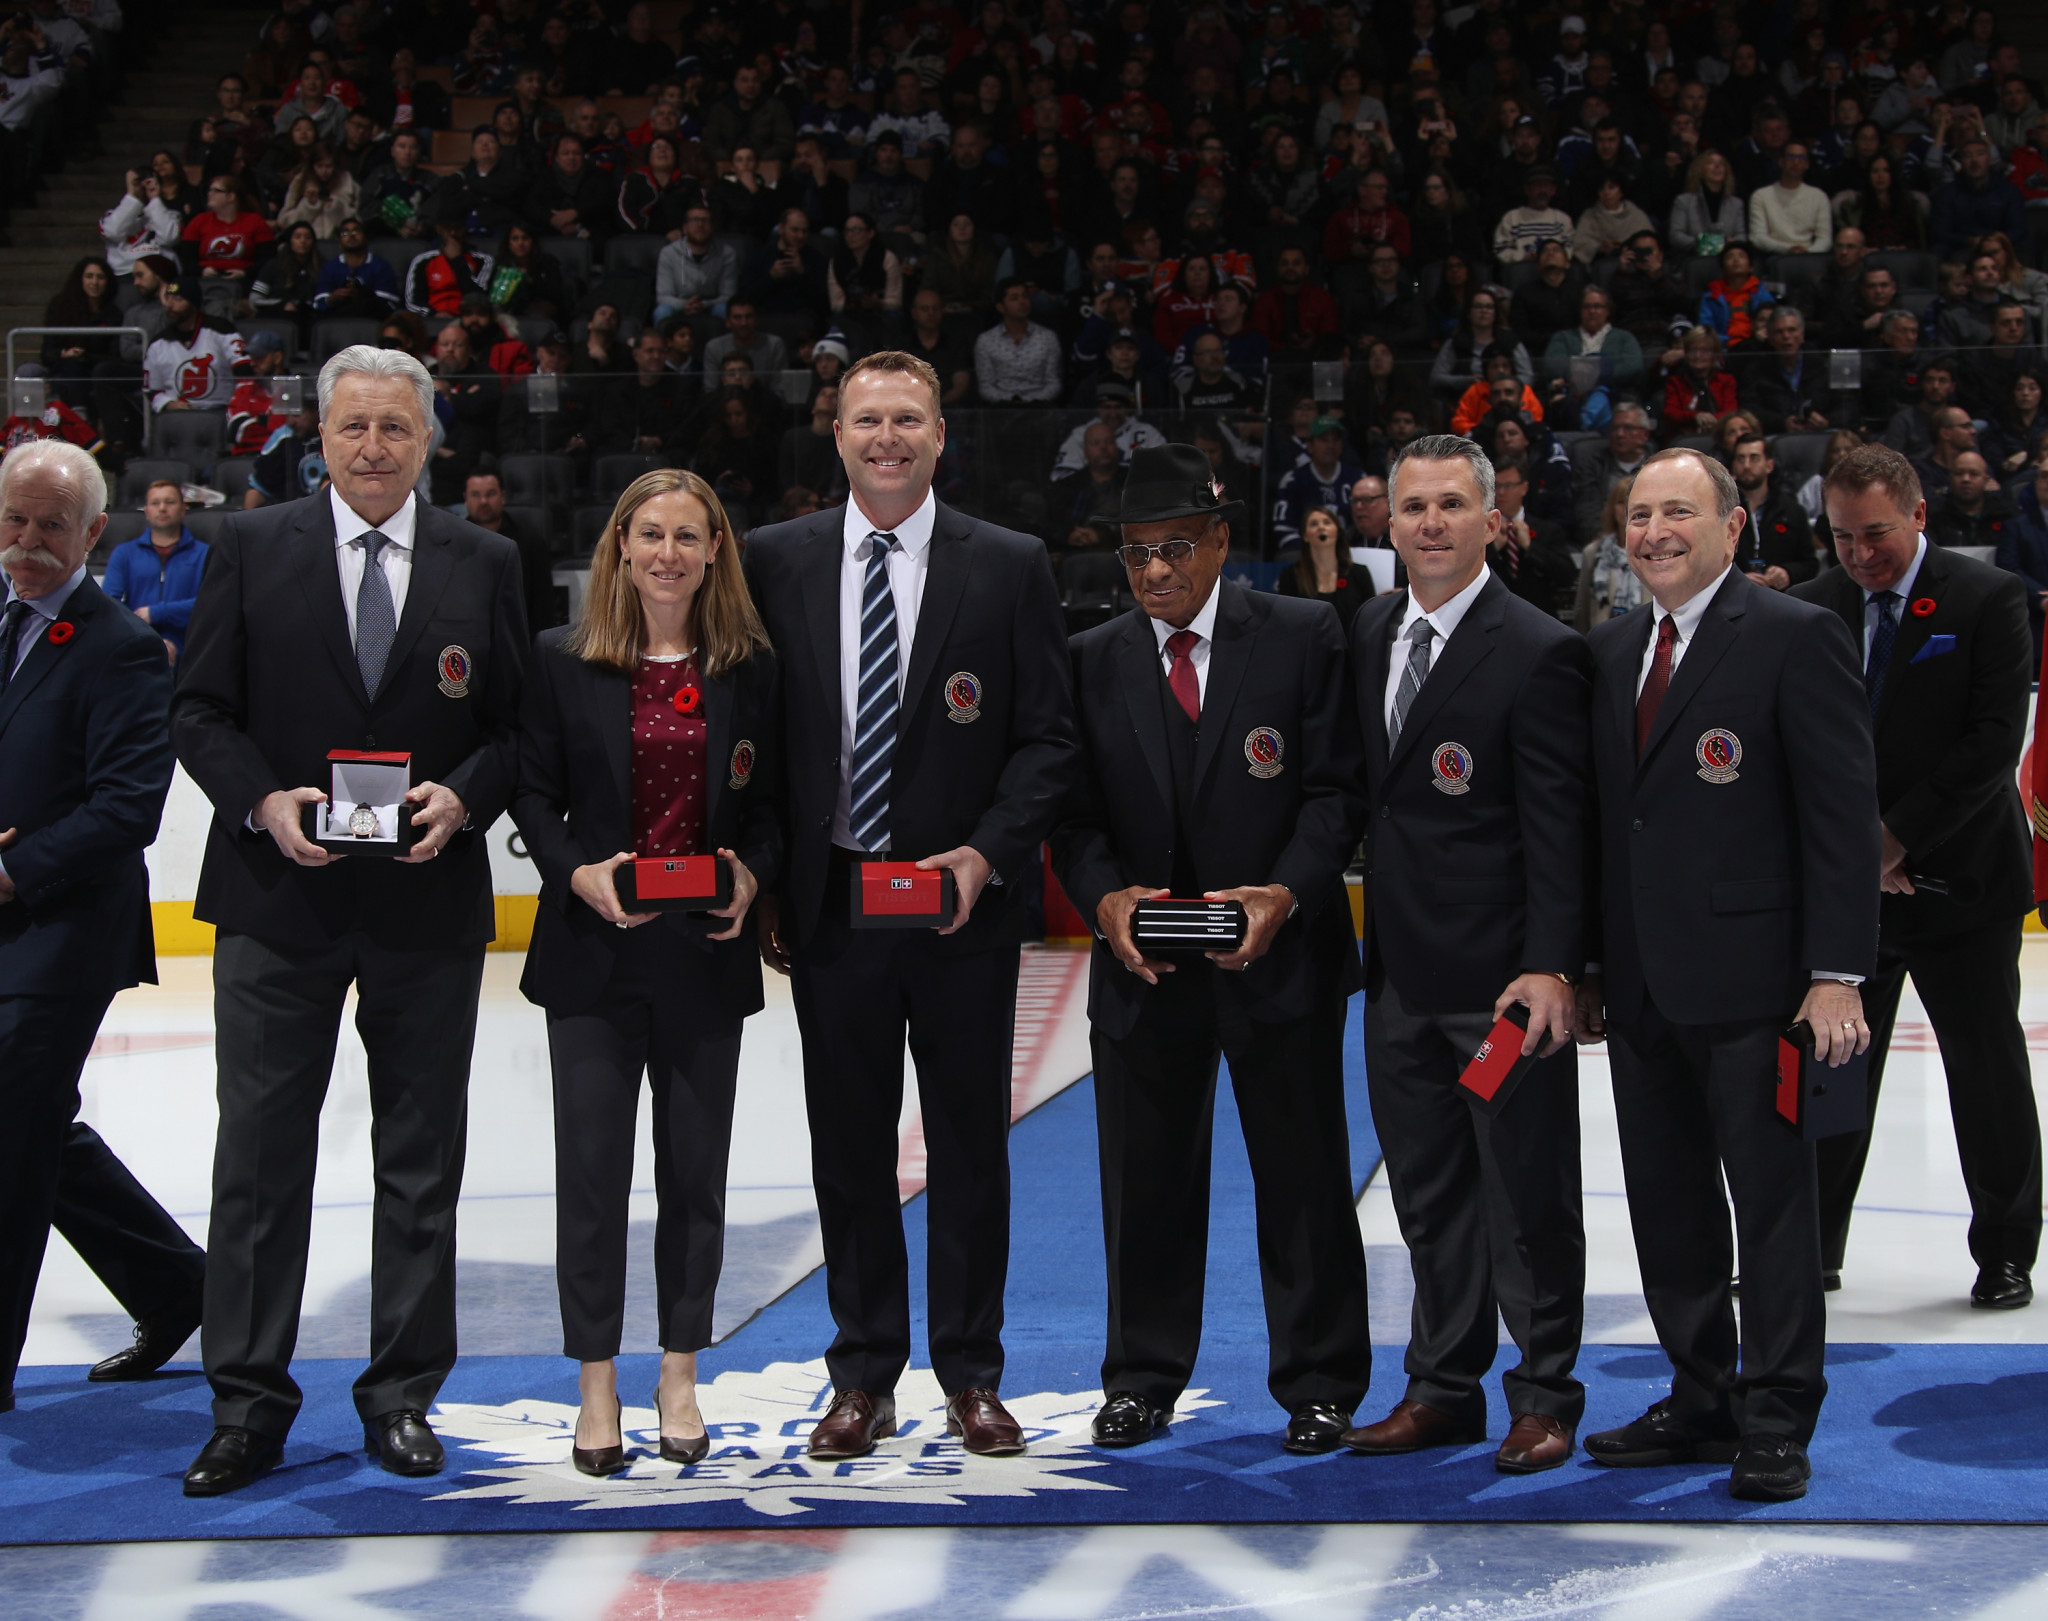 Four players inducted into ice hockey's Hall of Fame